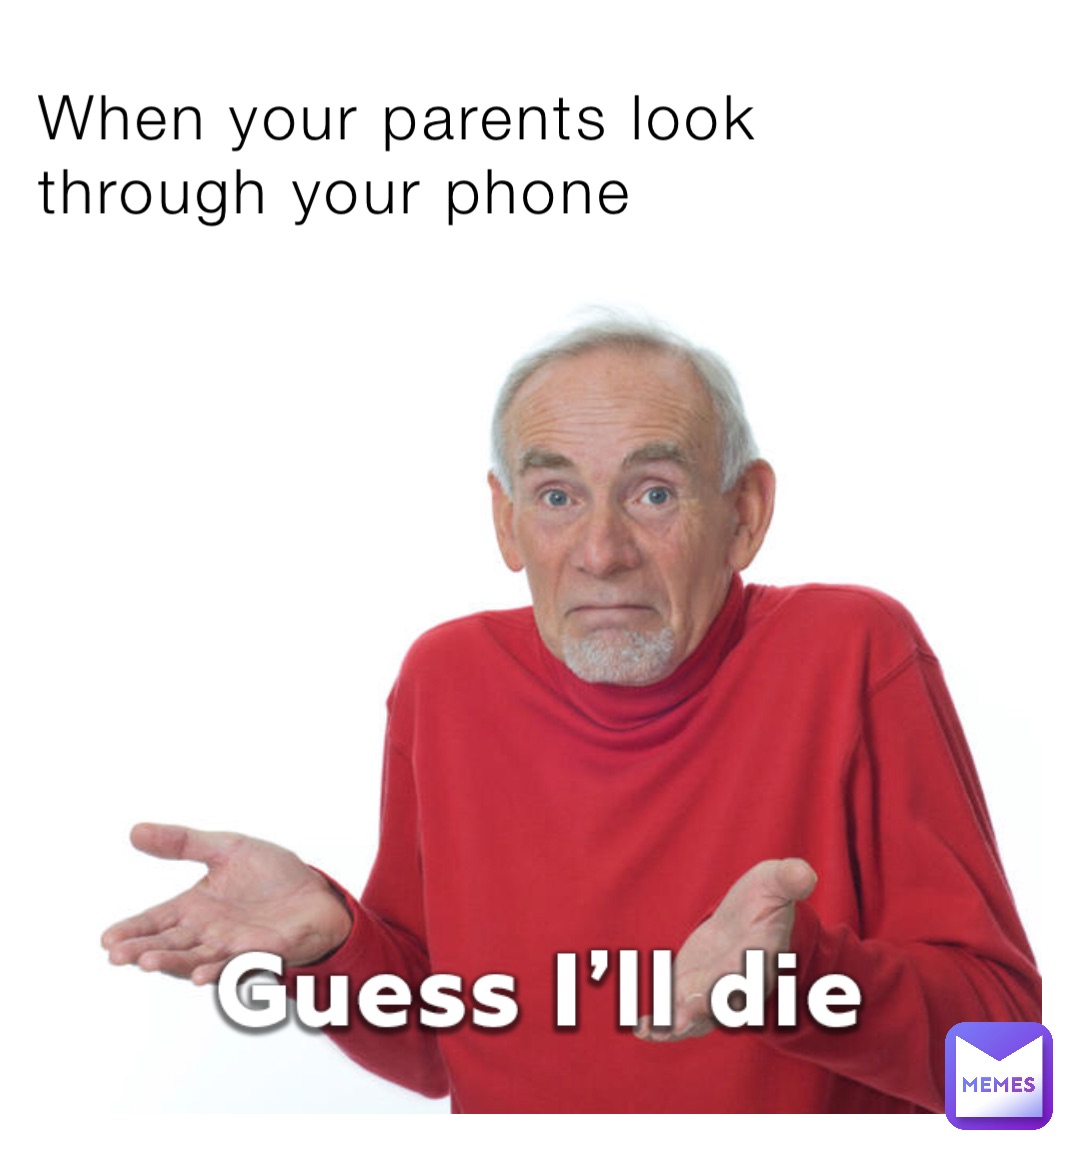 When your parents look through your phone